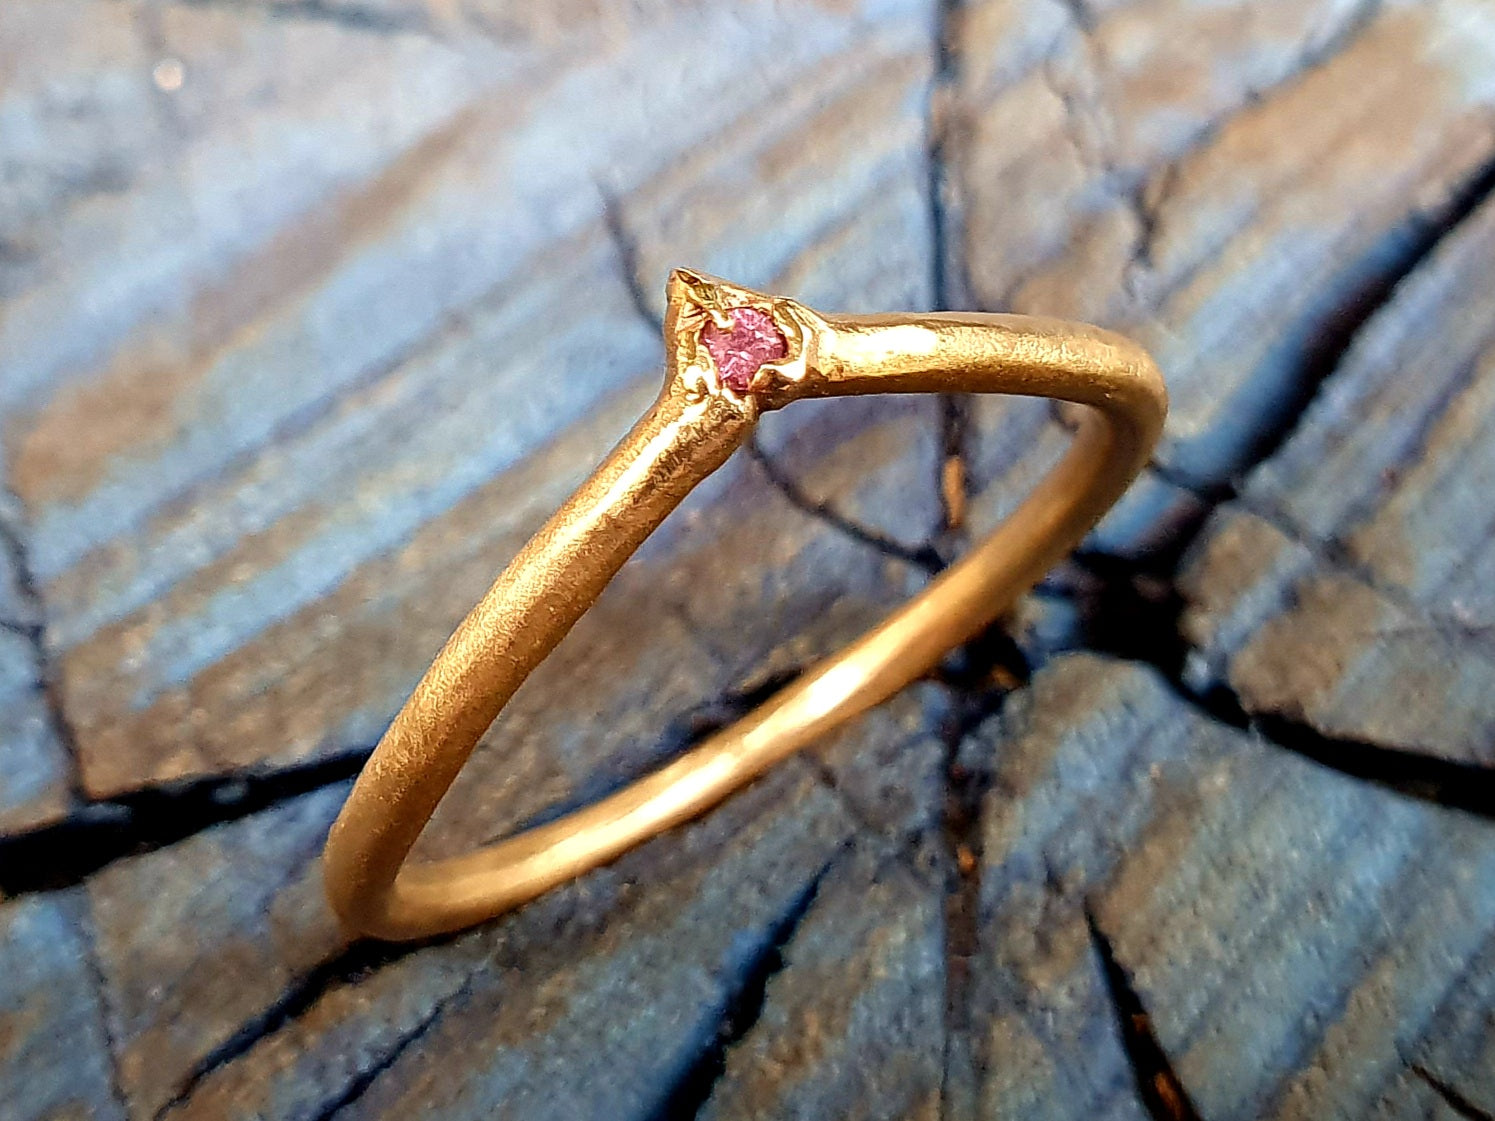 Orion Ring - 9k gold and sapphire ring